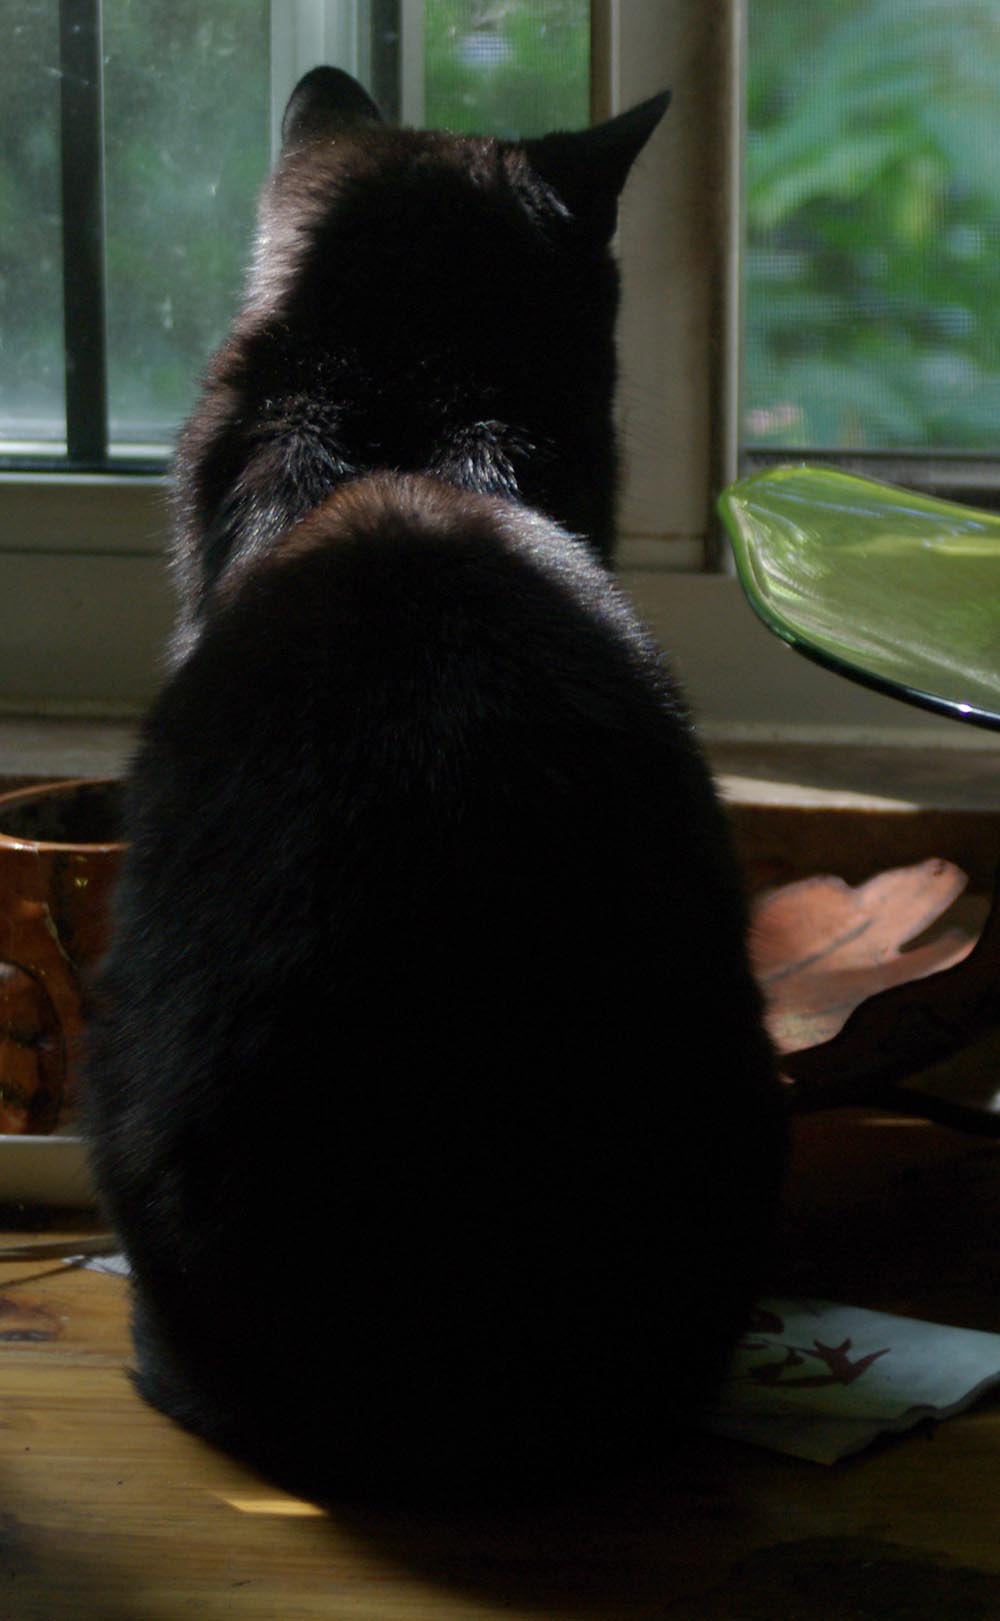 photo of black cat looking out window